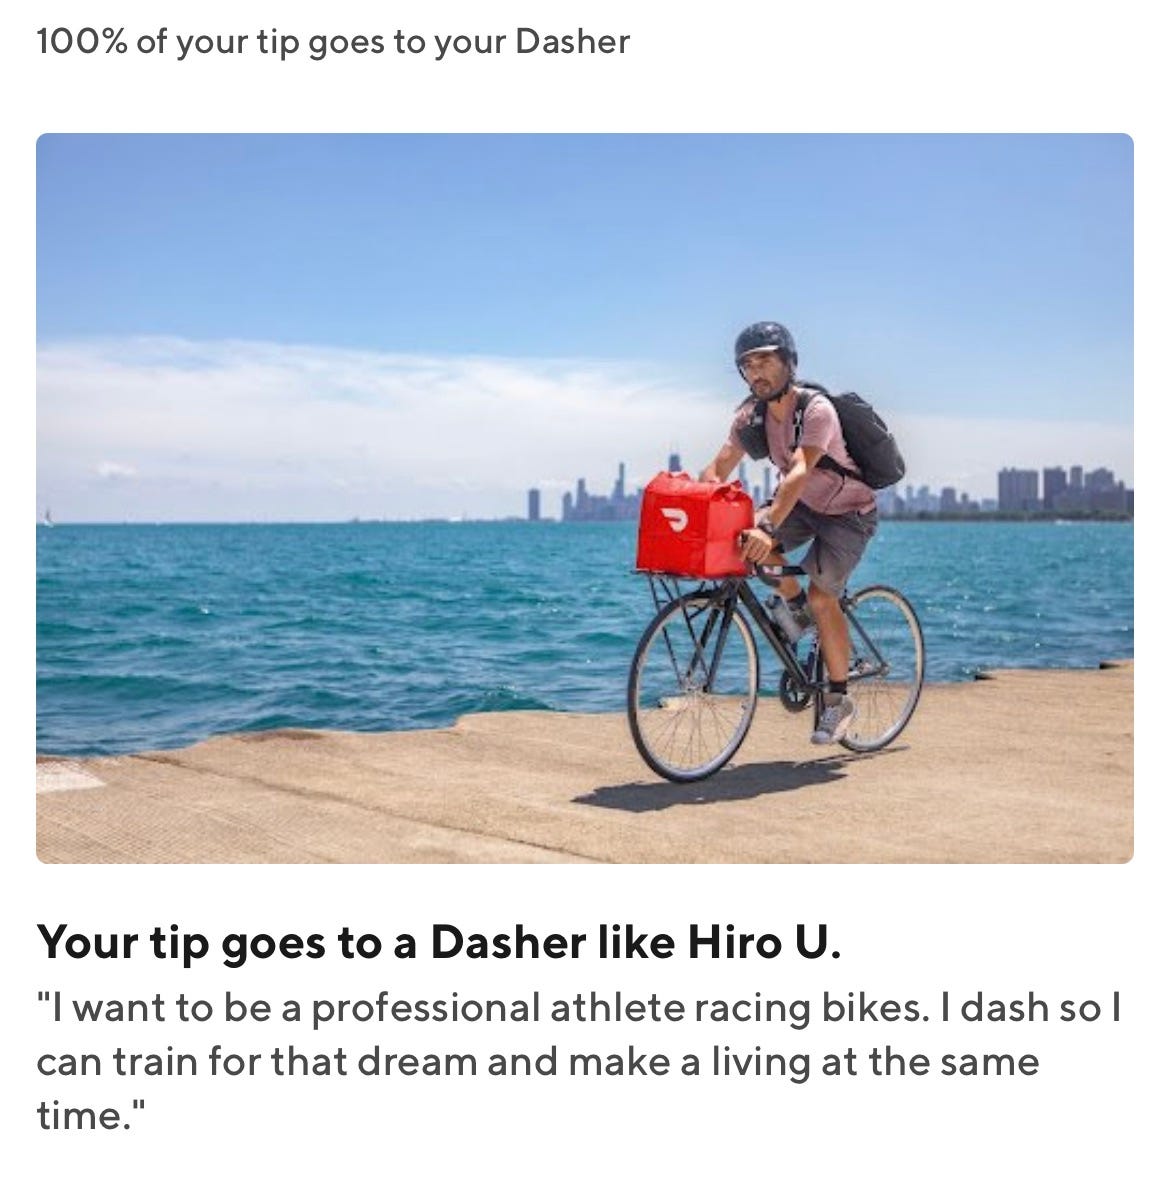 Did you know that the average #Dasher is represented in the DoorDash - Dasher app by "Hiro U." - who wants, "to be a professional athlete racing bikes," and dashes so he can "train for that dream and make a living at the same time." What spectacular fun and fortune for our #Hiro!